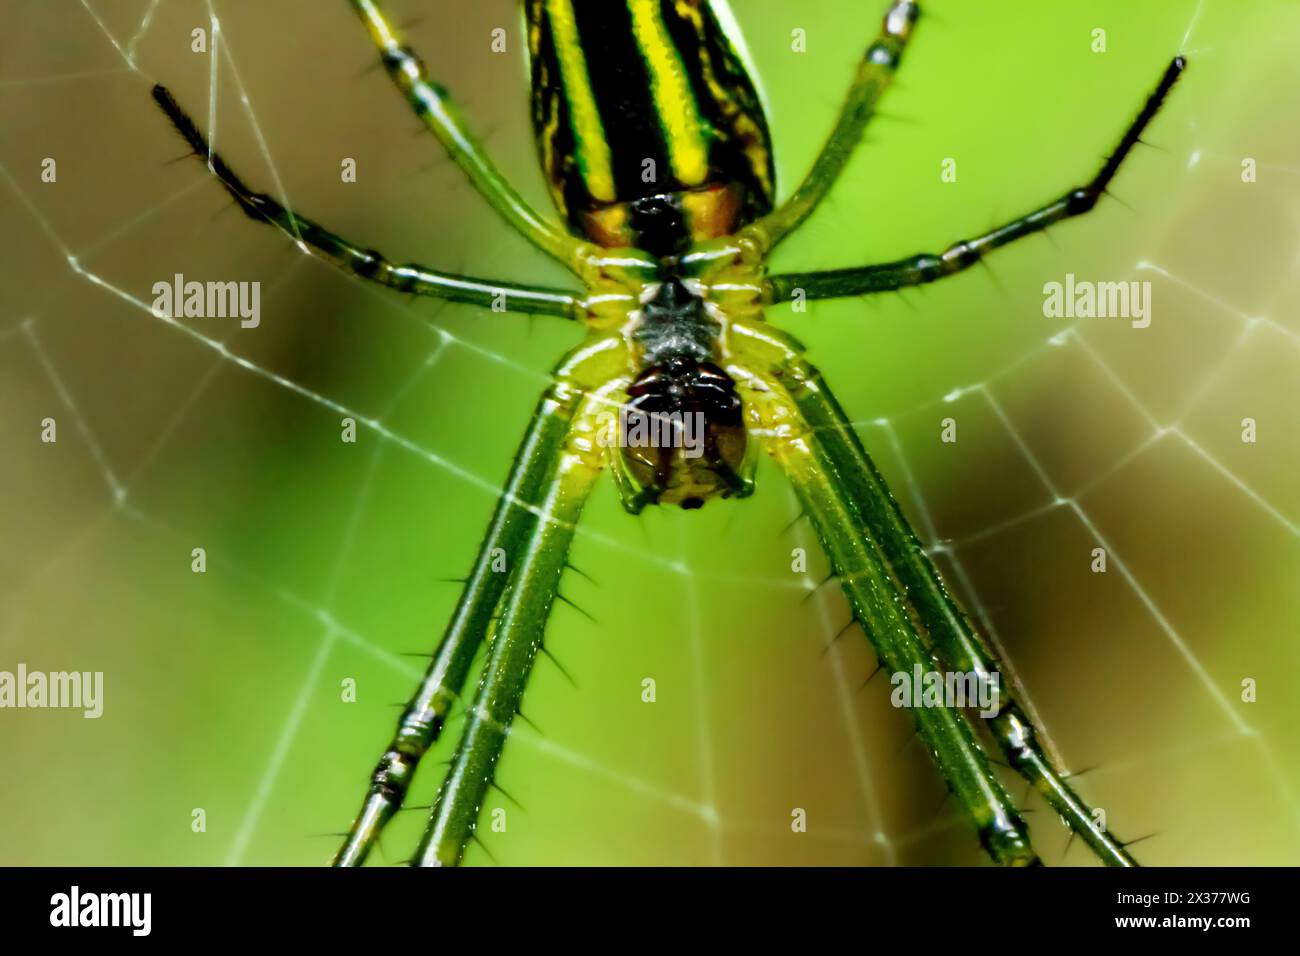 A vibrant Leucauge magnifica spider, showcasing its colorful body, is captured skillfully weaving its intricate web. Wulai District, New Taipei City. Stock Photo